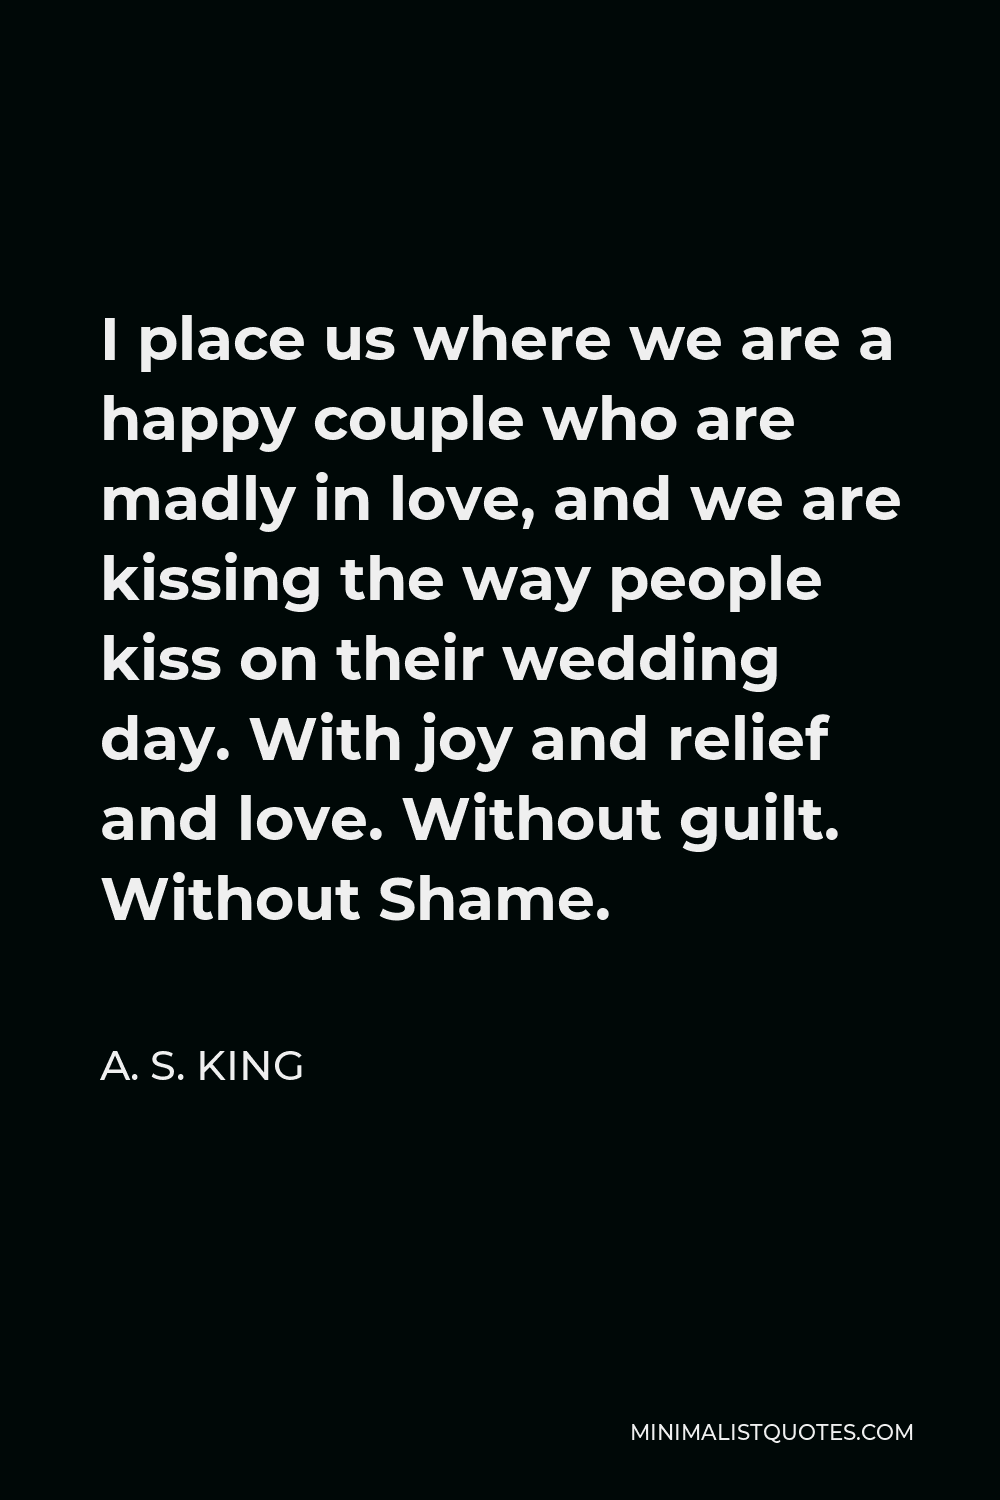 A. S. King Quote - I place us where we are a happy couple who are madly in love, and we are kissing the way people kiss on their wedding day. With joy and relief and love. Without guilt. Without Shame.